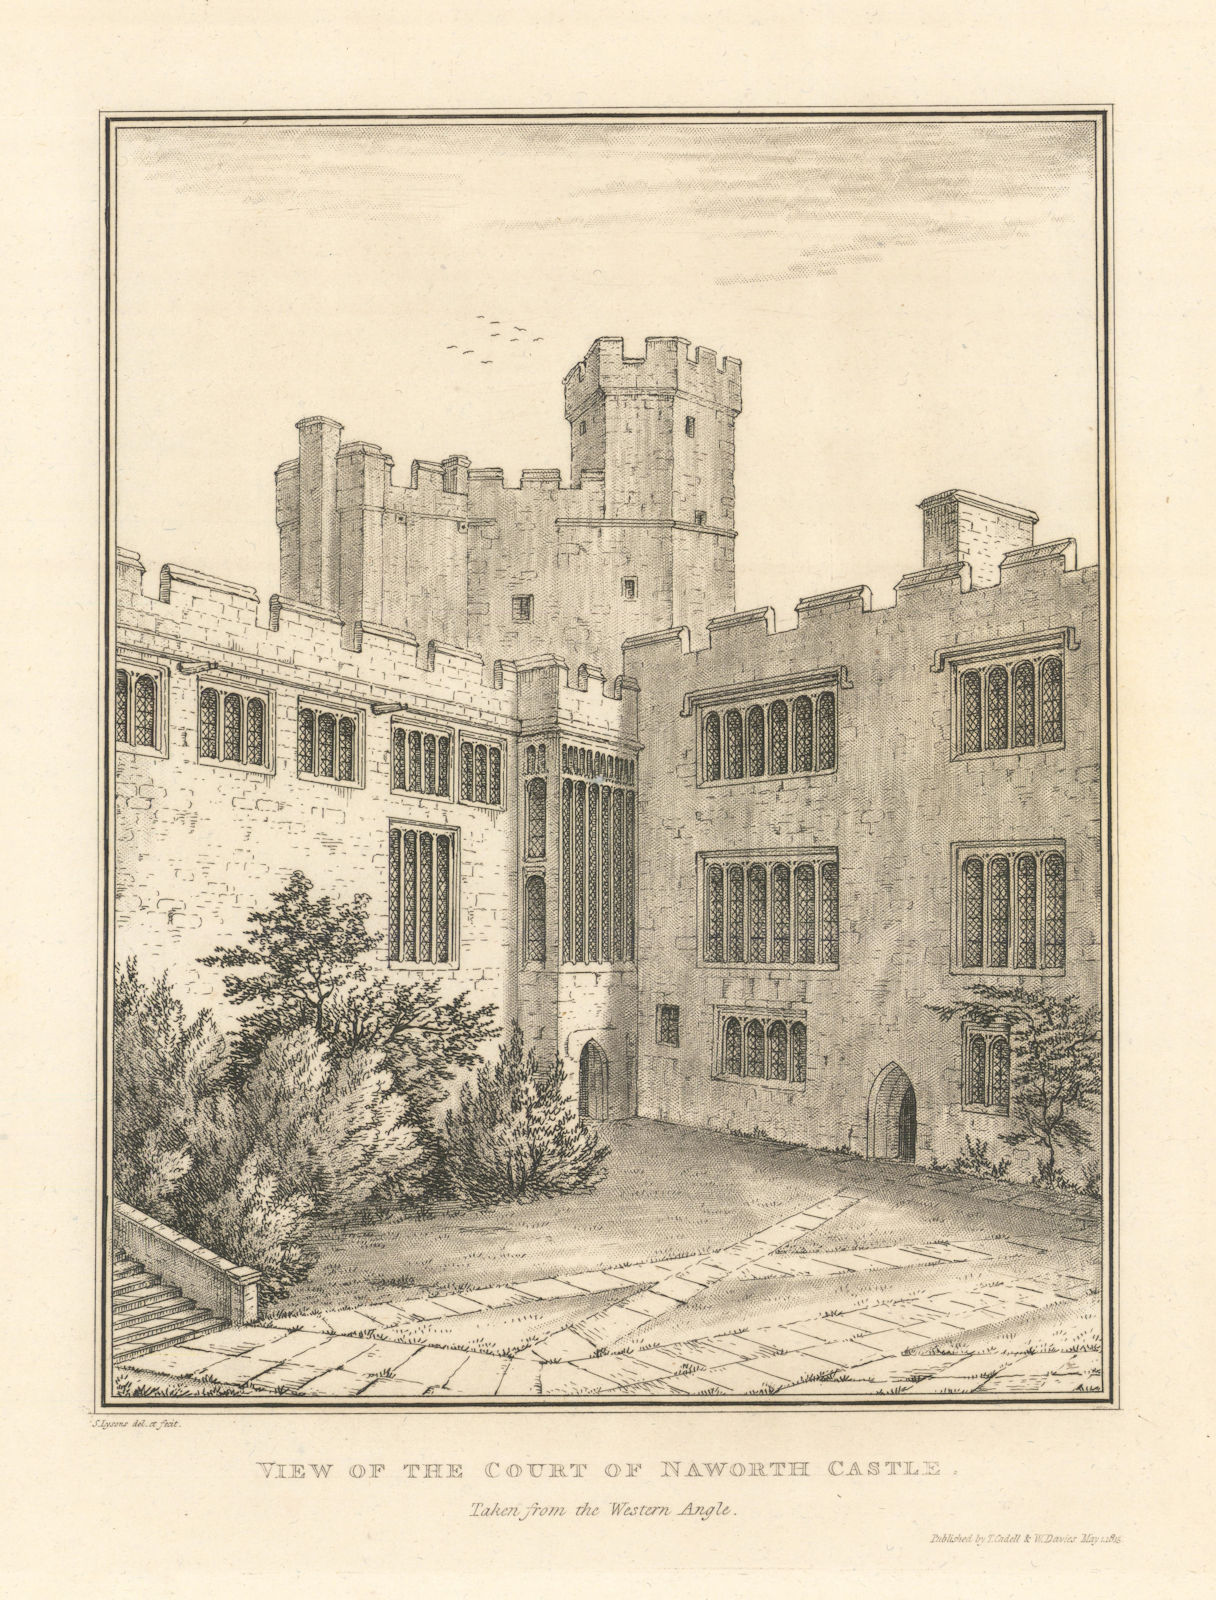 Associate Product View of the Court of Naworth Castle, Cumbria by Samuel Lysons 1816 old print